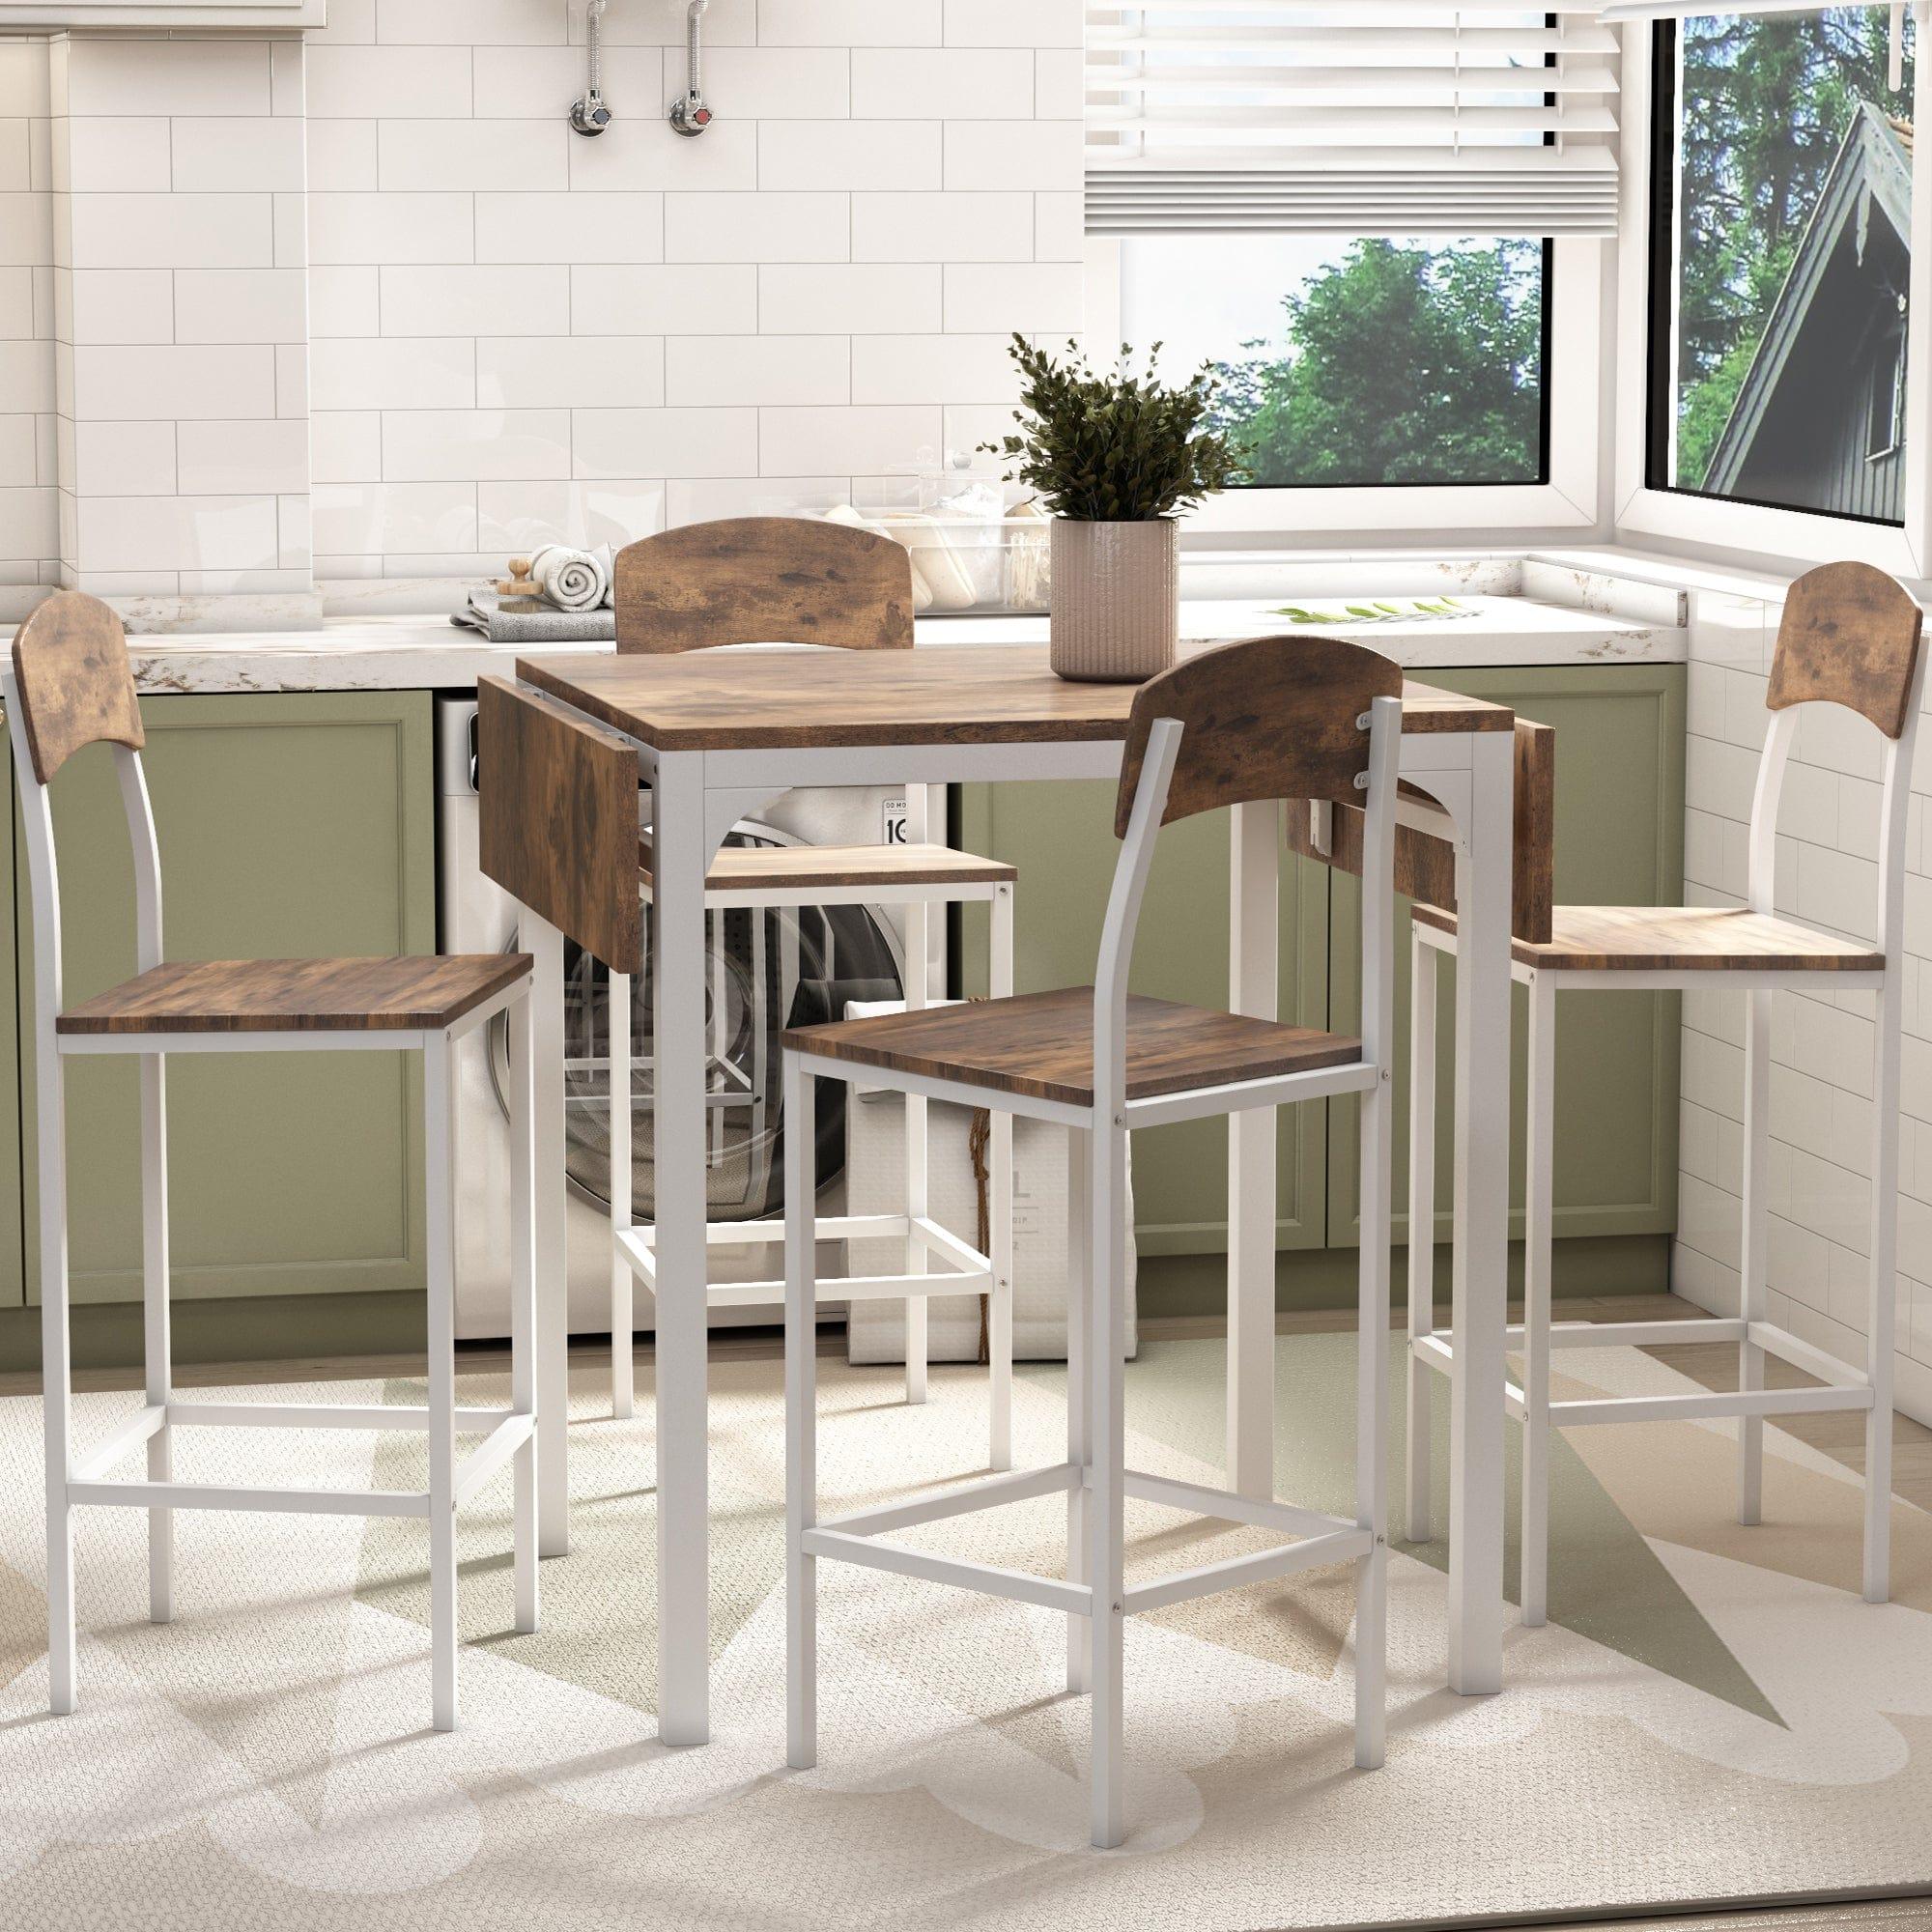 Shop Barcelona 4 Seater Dining Table Set Mademoiselle Home Decor